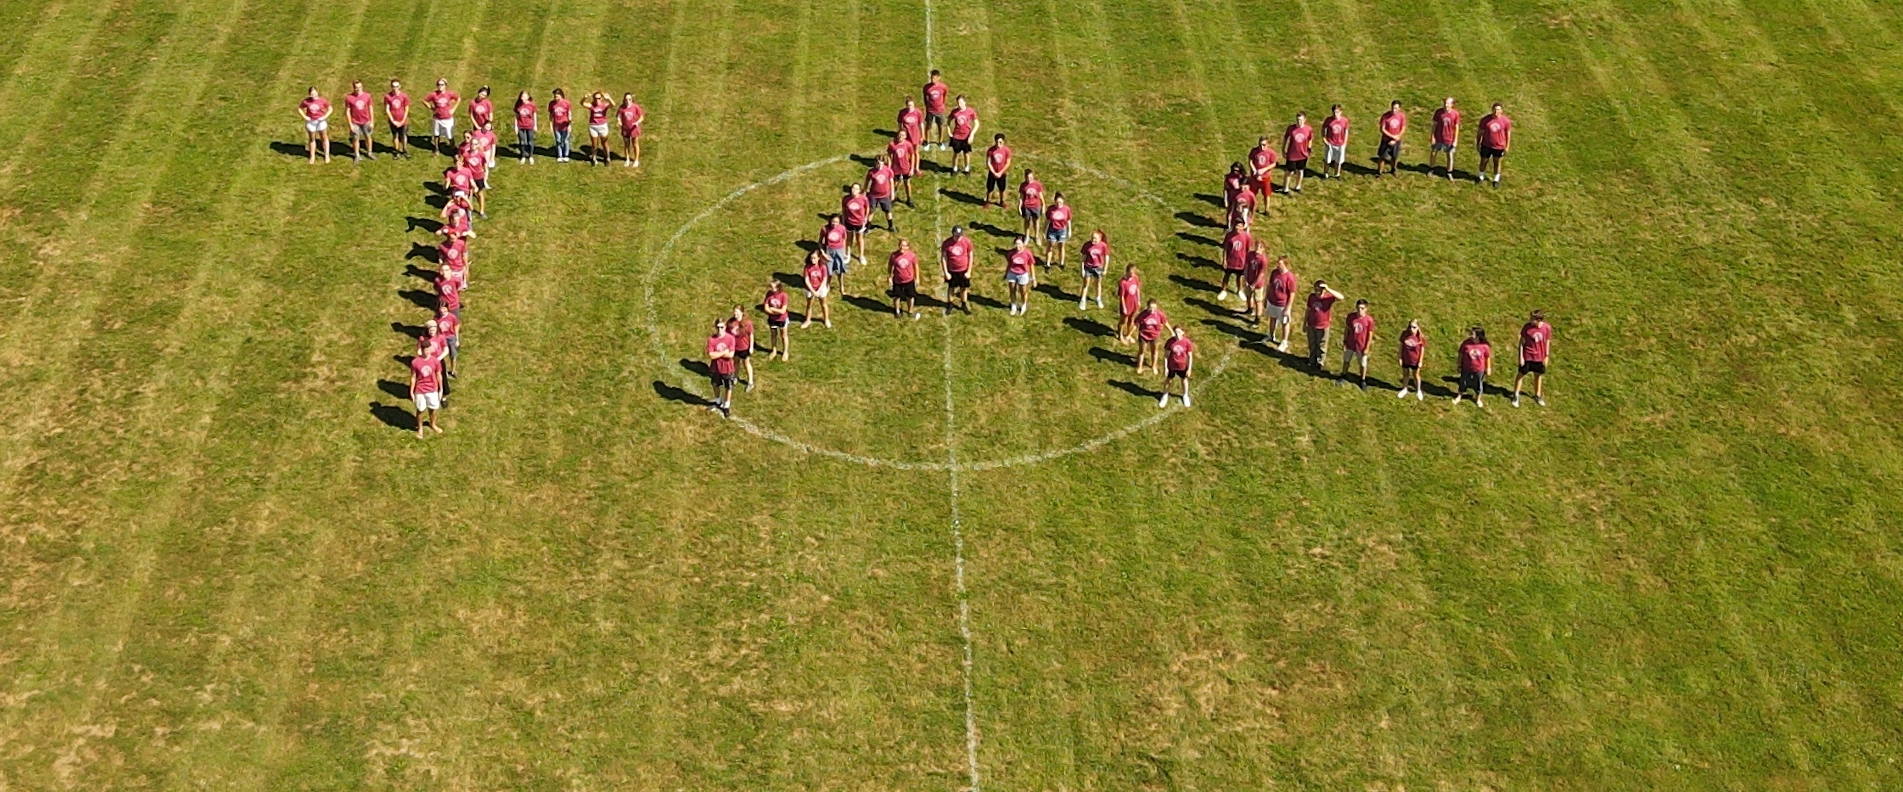 Students form the letters "T A C"